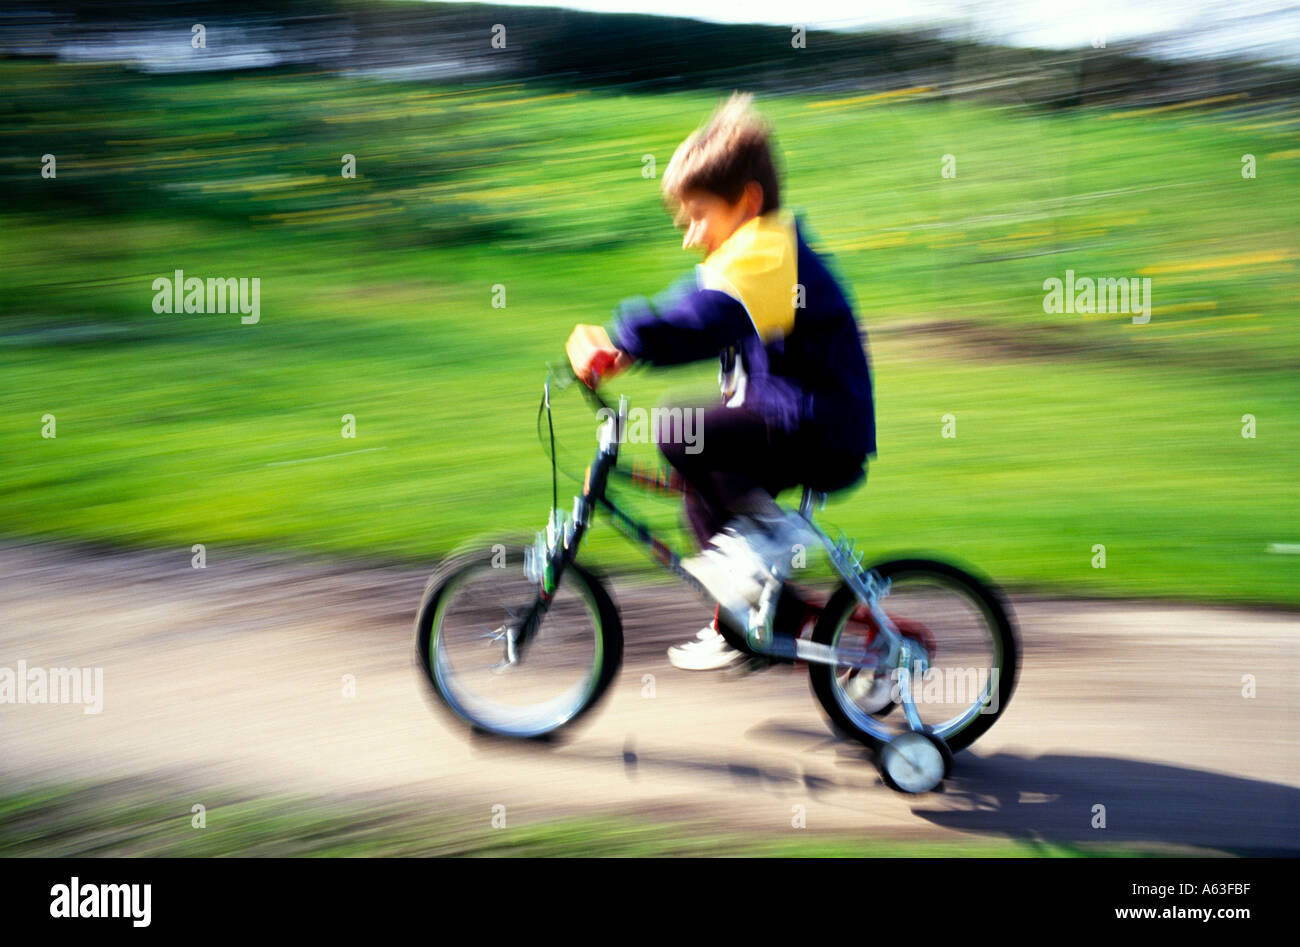 Young boy on a bicycle with stabilisers Stock Photo